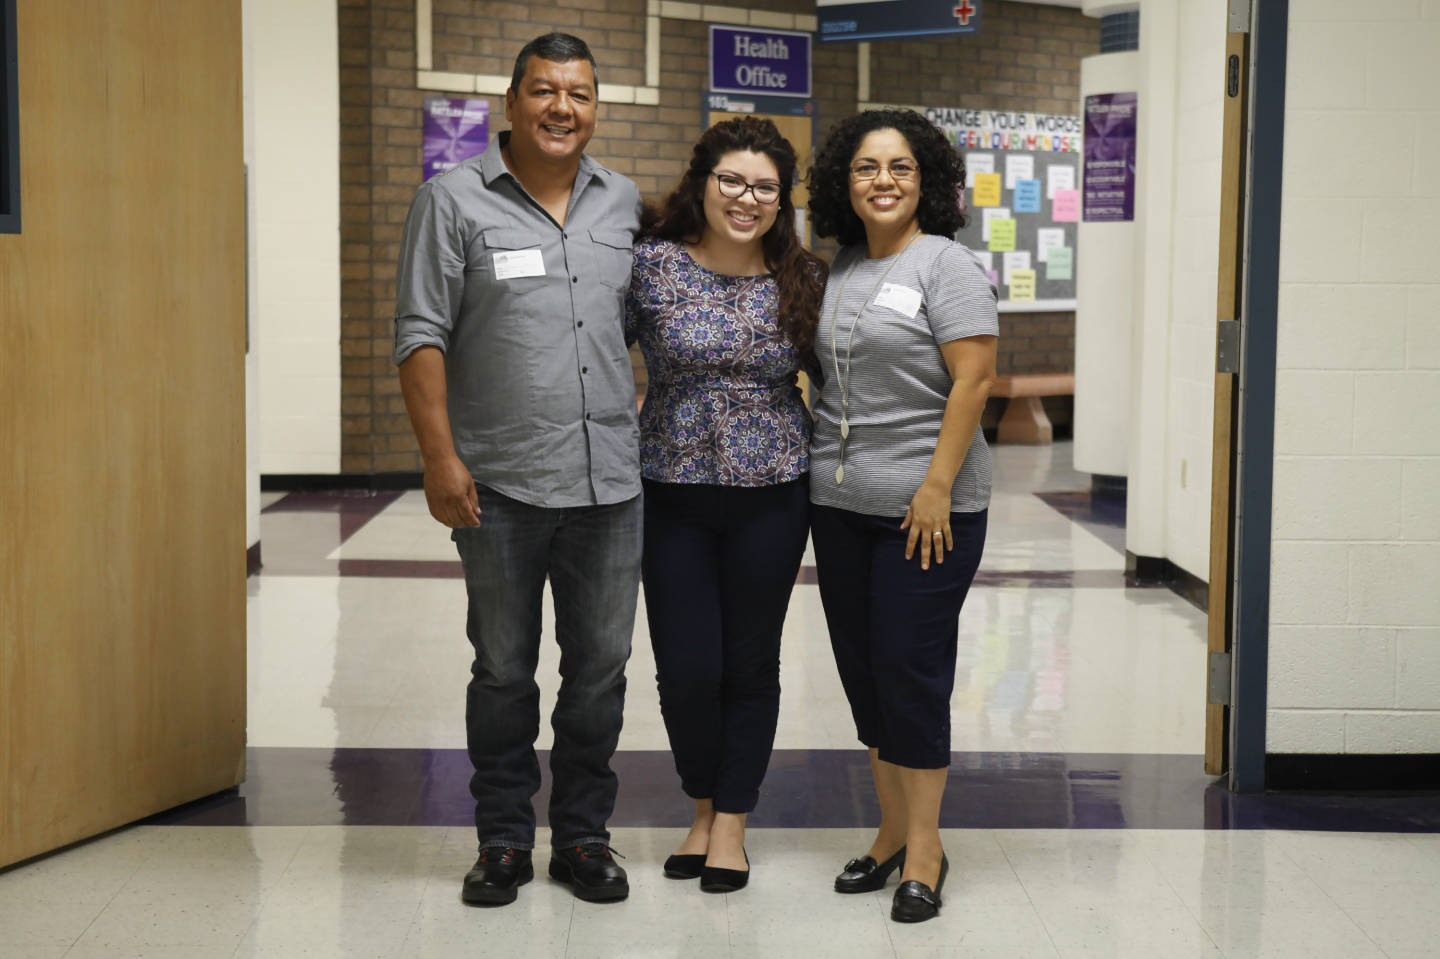 Alejandra's mom, Norma Galindo, is originally from El Salvador. Her dad, Arnulfo Galindo, is from Mexico. They've always known their daughter was bright beyond her years.